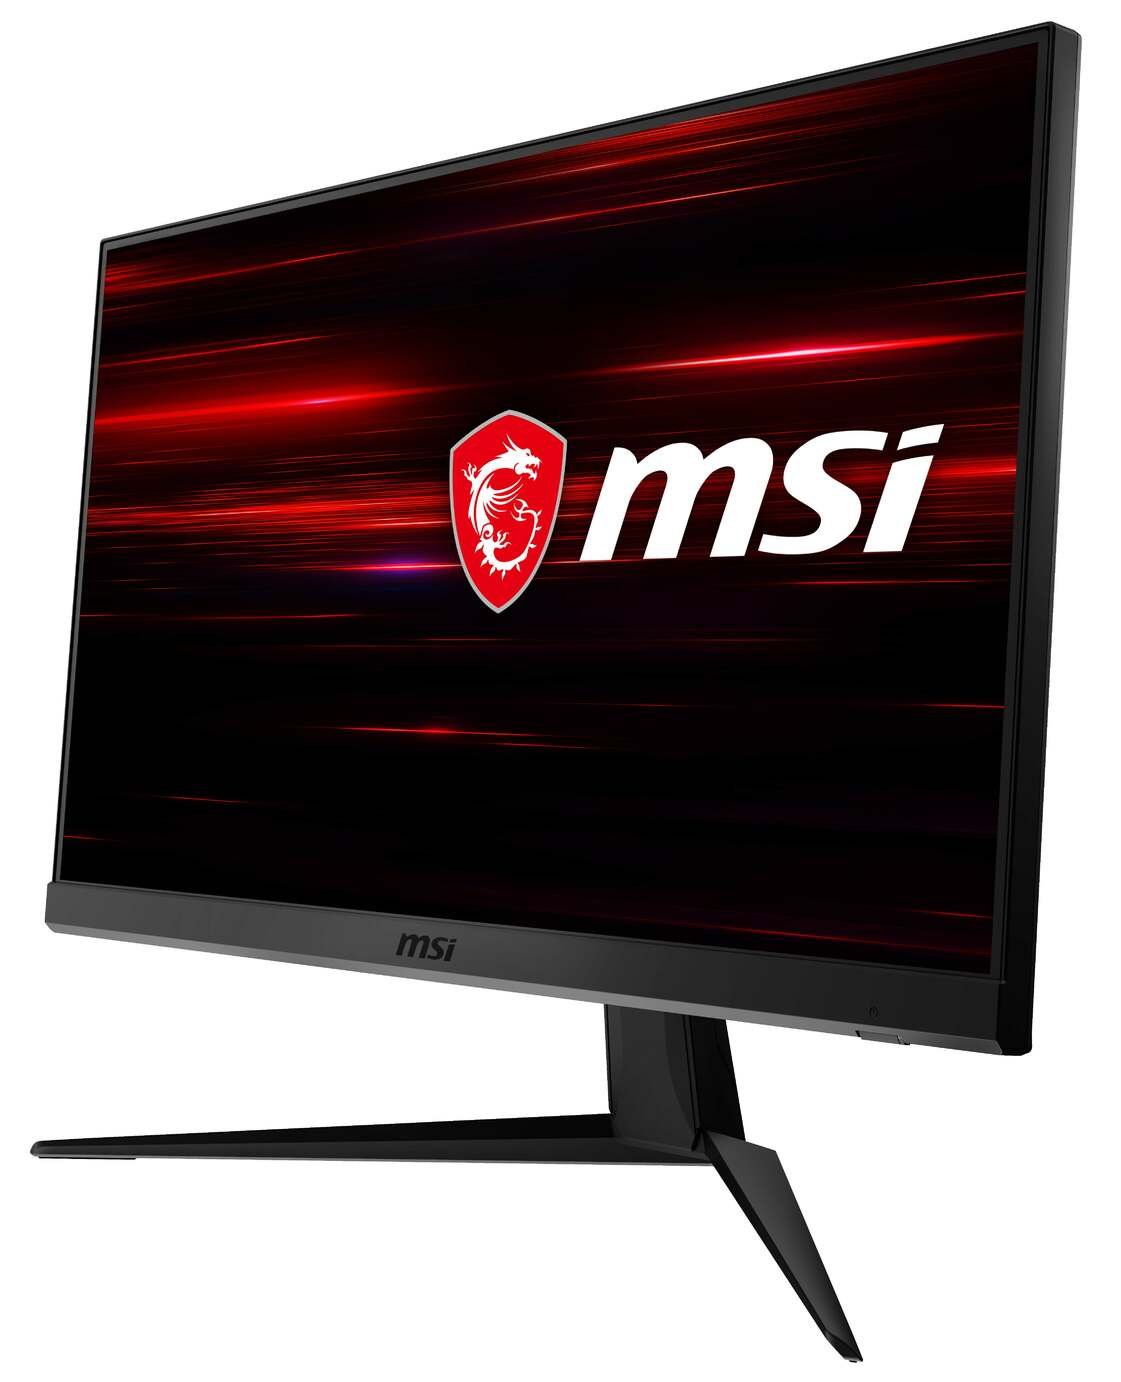 MSI G241V 23.8in 75Hz FHD IPS Gaming Monitor Review